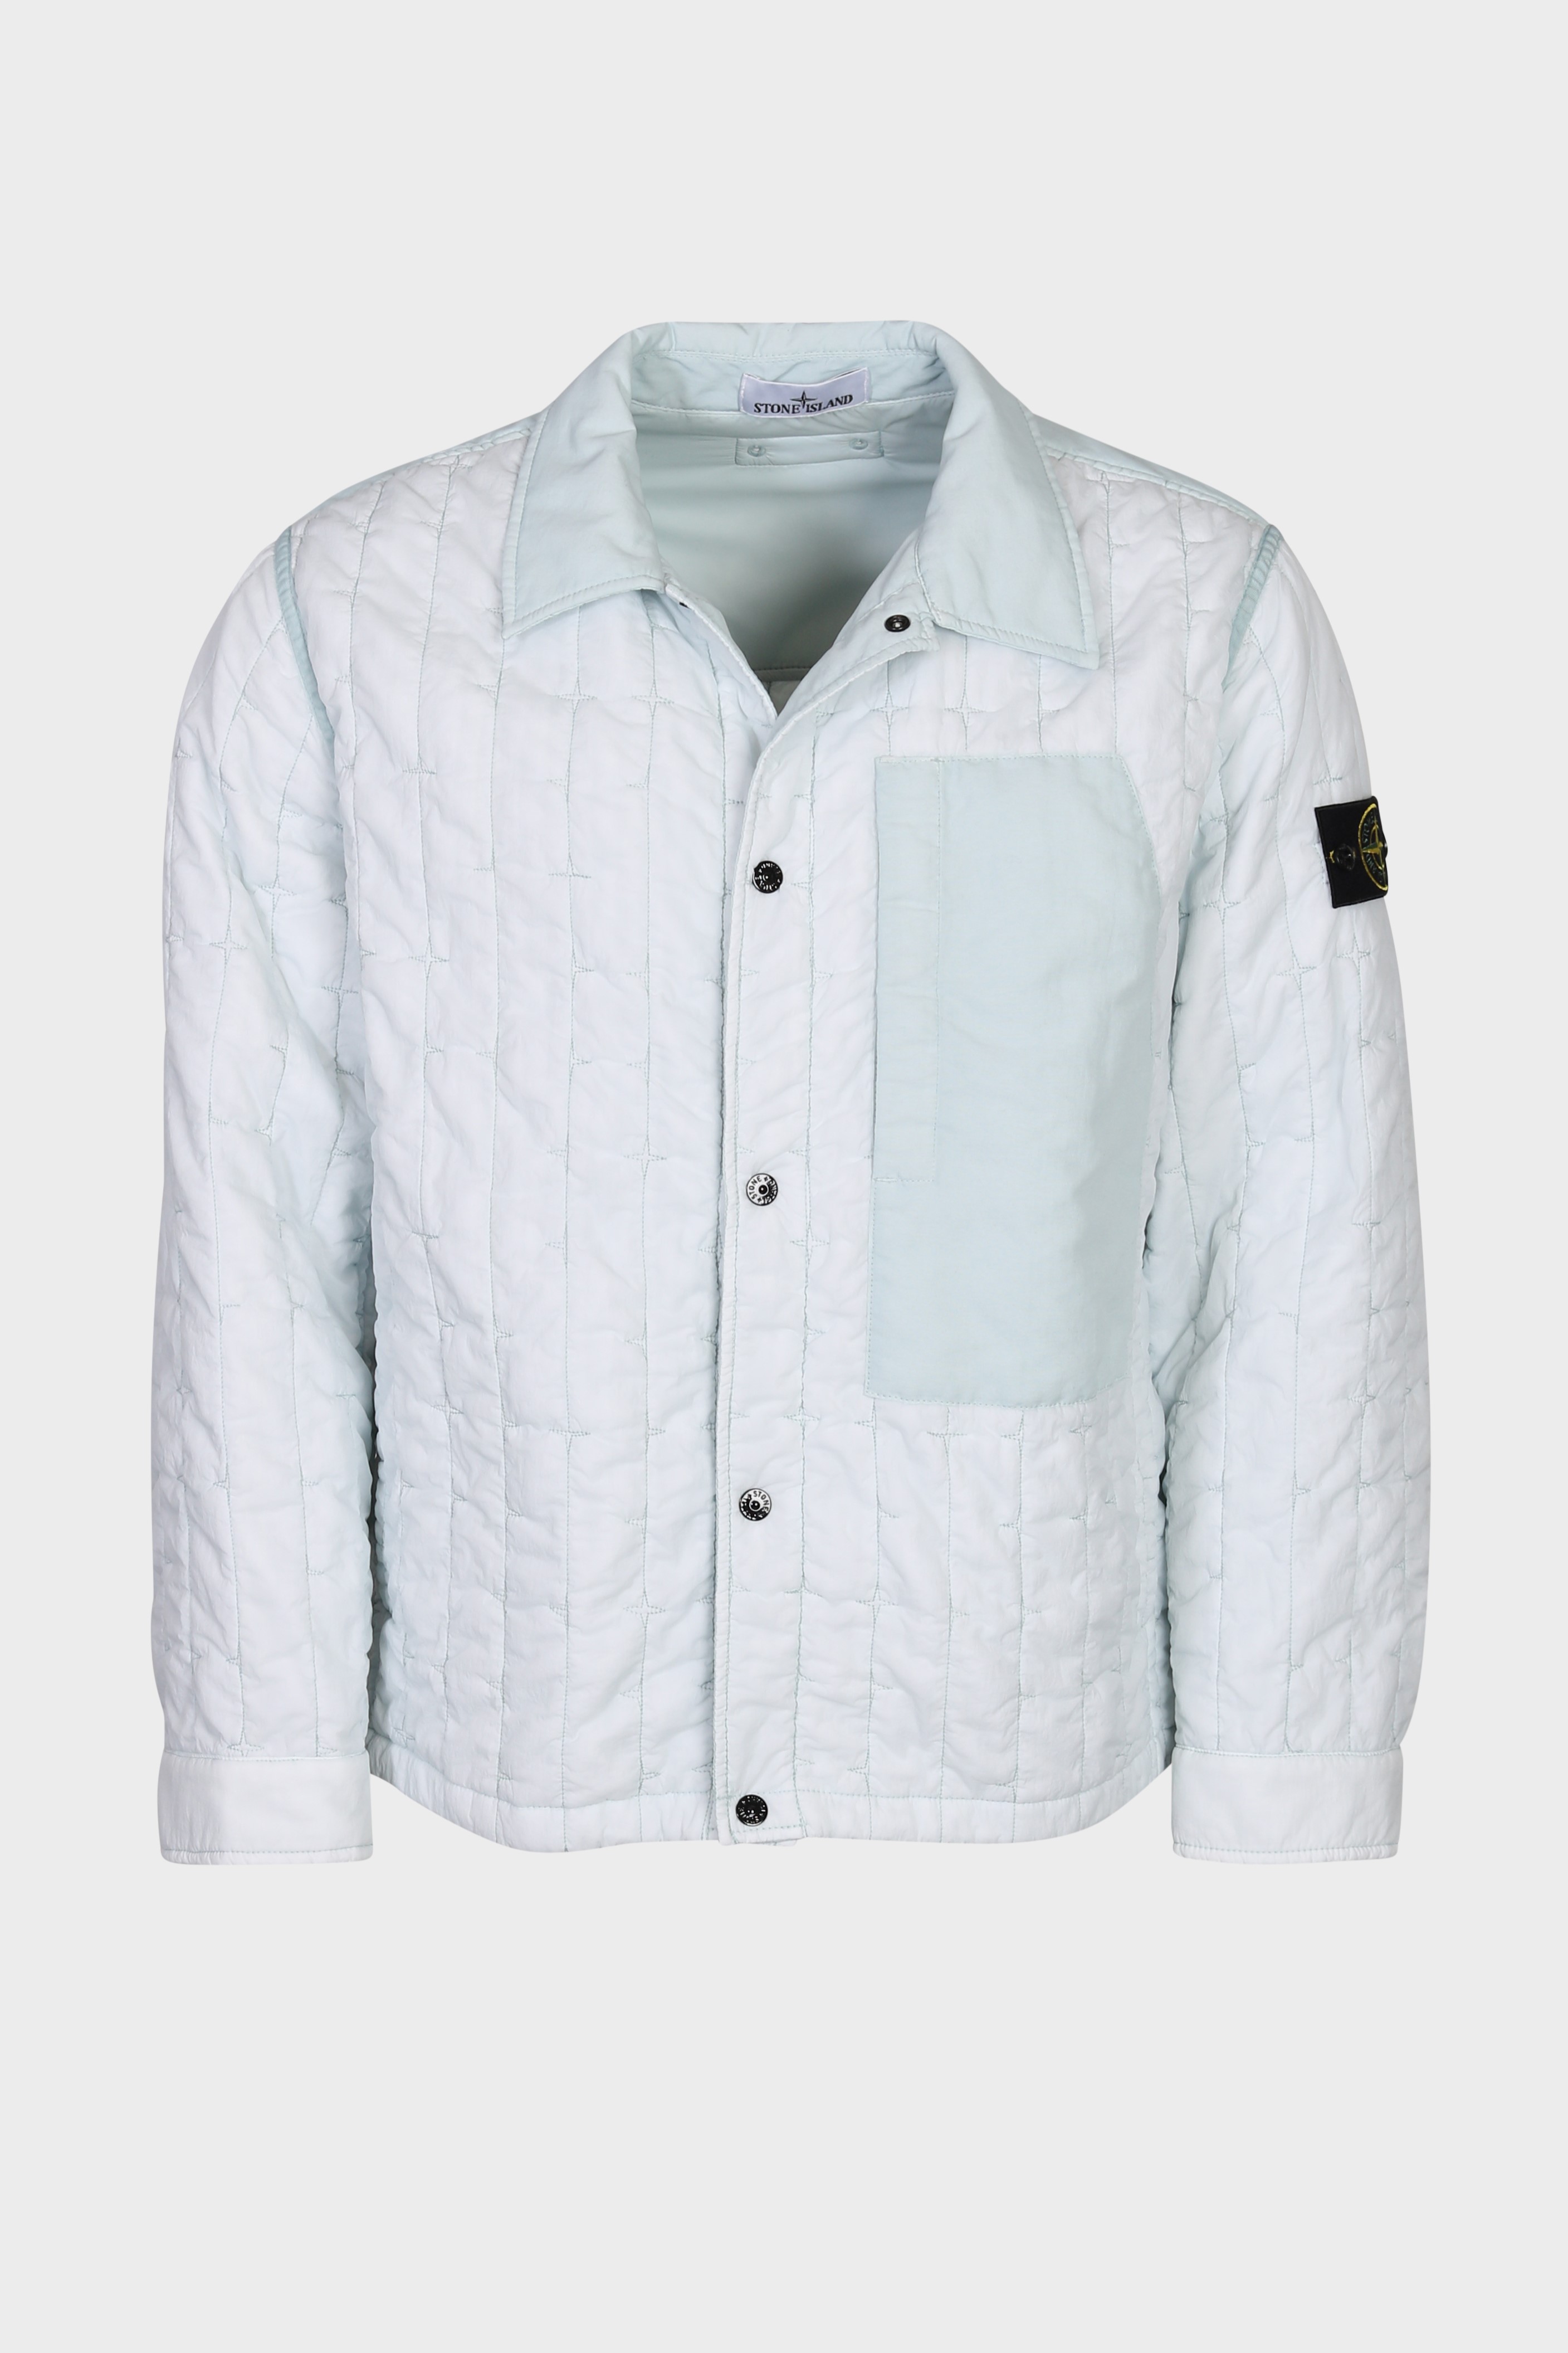 STONE ISLAND Quilted Nylon Stella Jacket in Sky Blue S